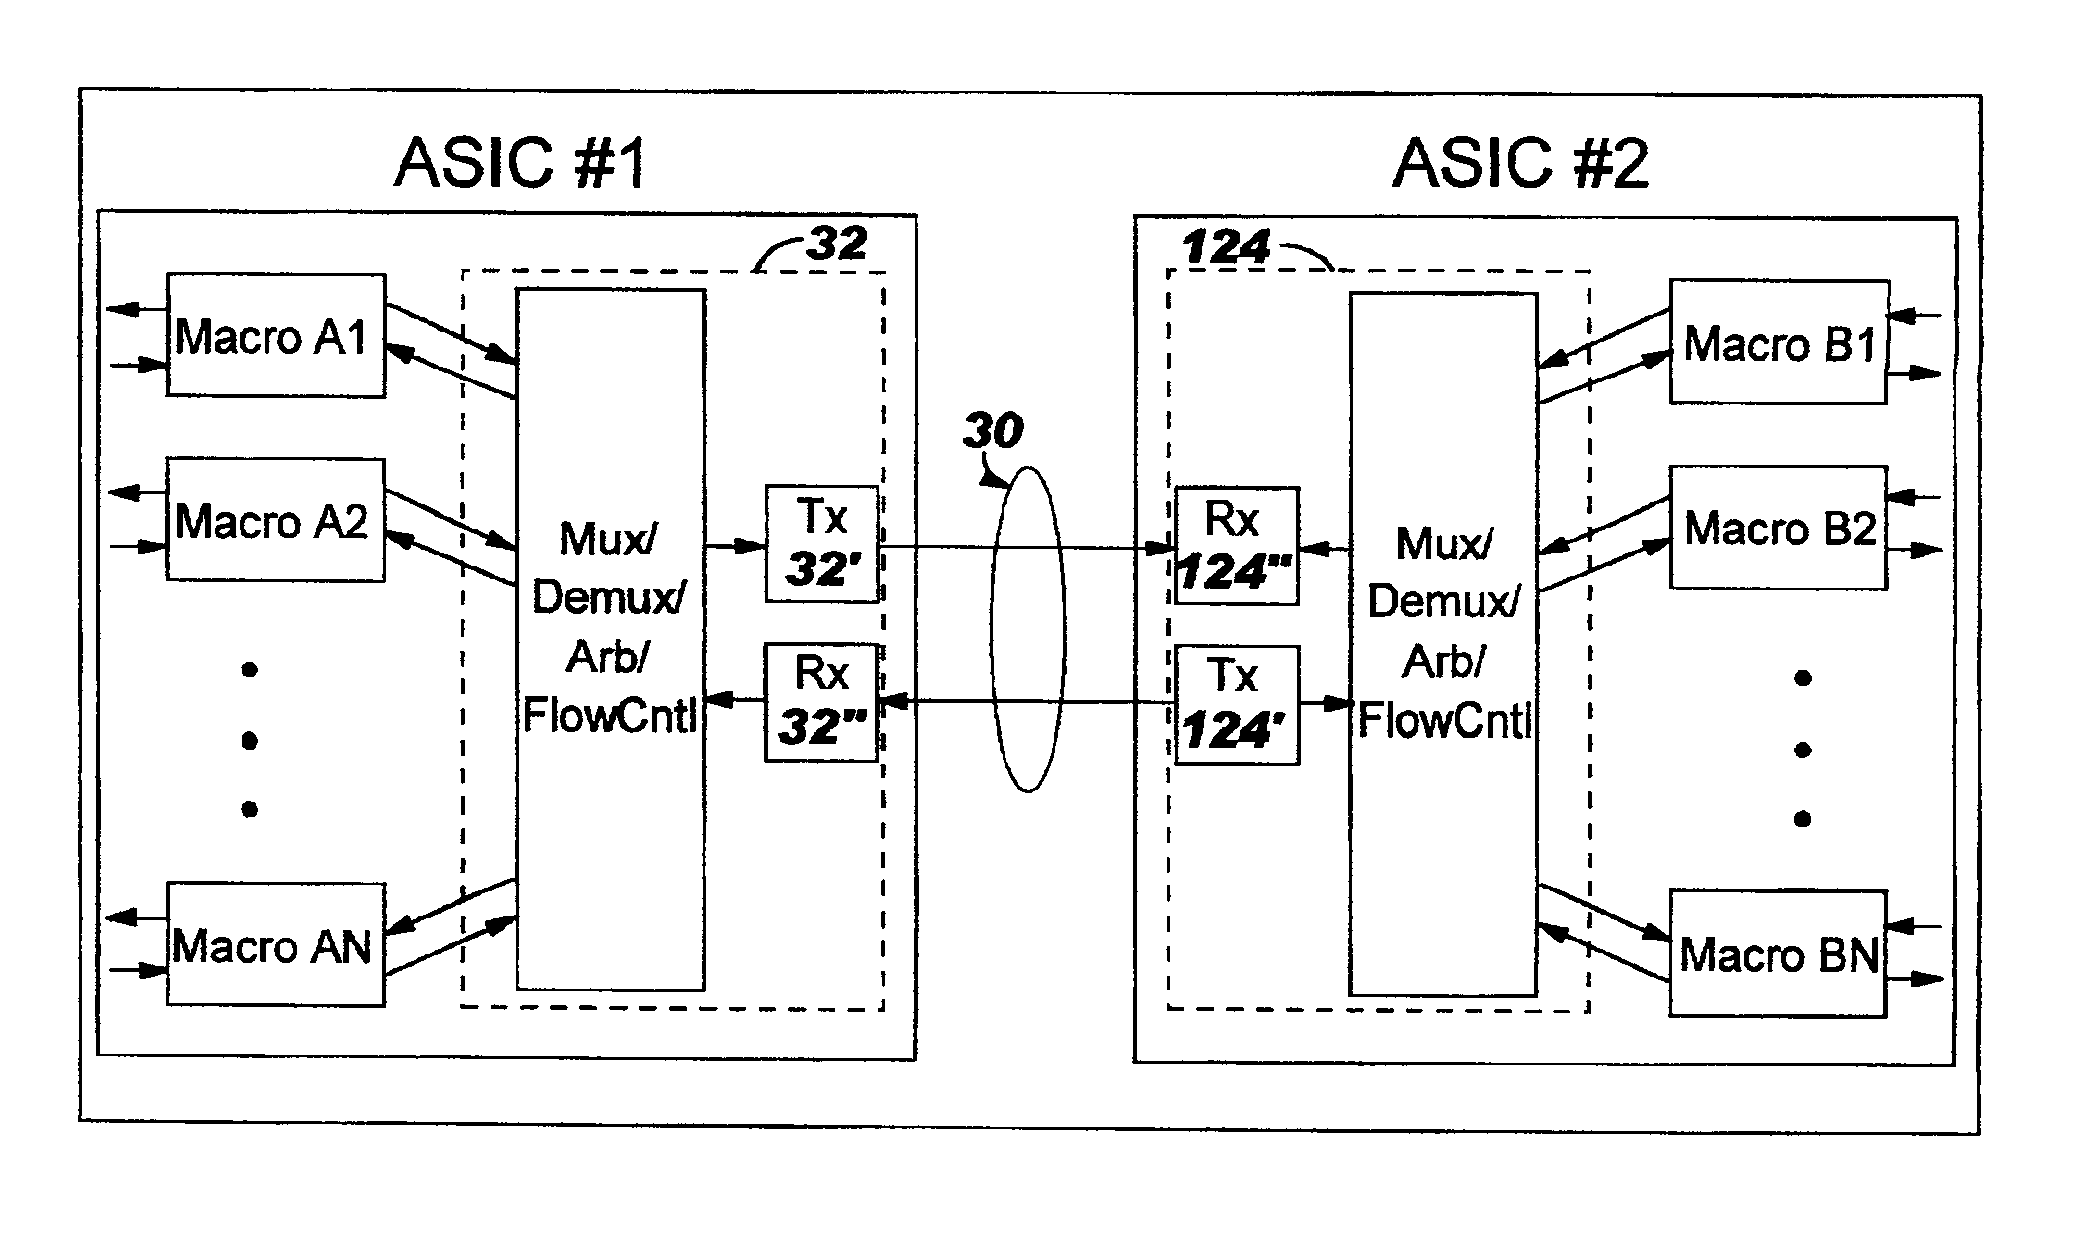 Chip to chip interface for interconnecting chips